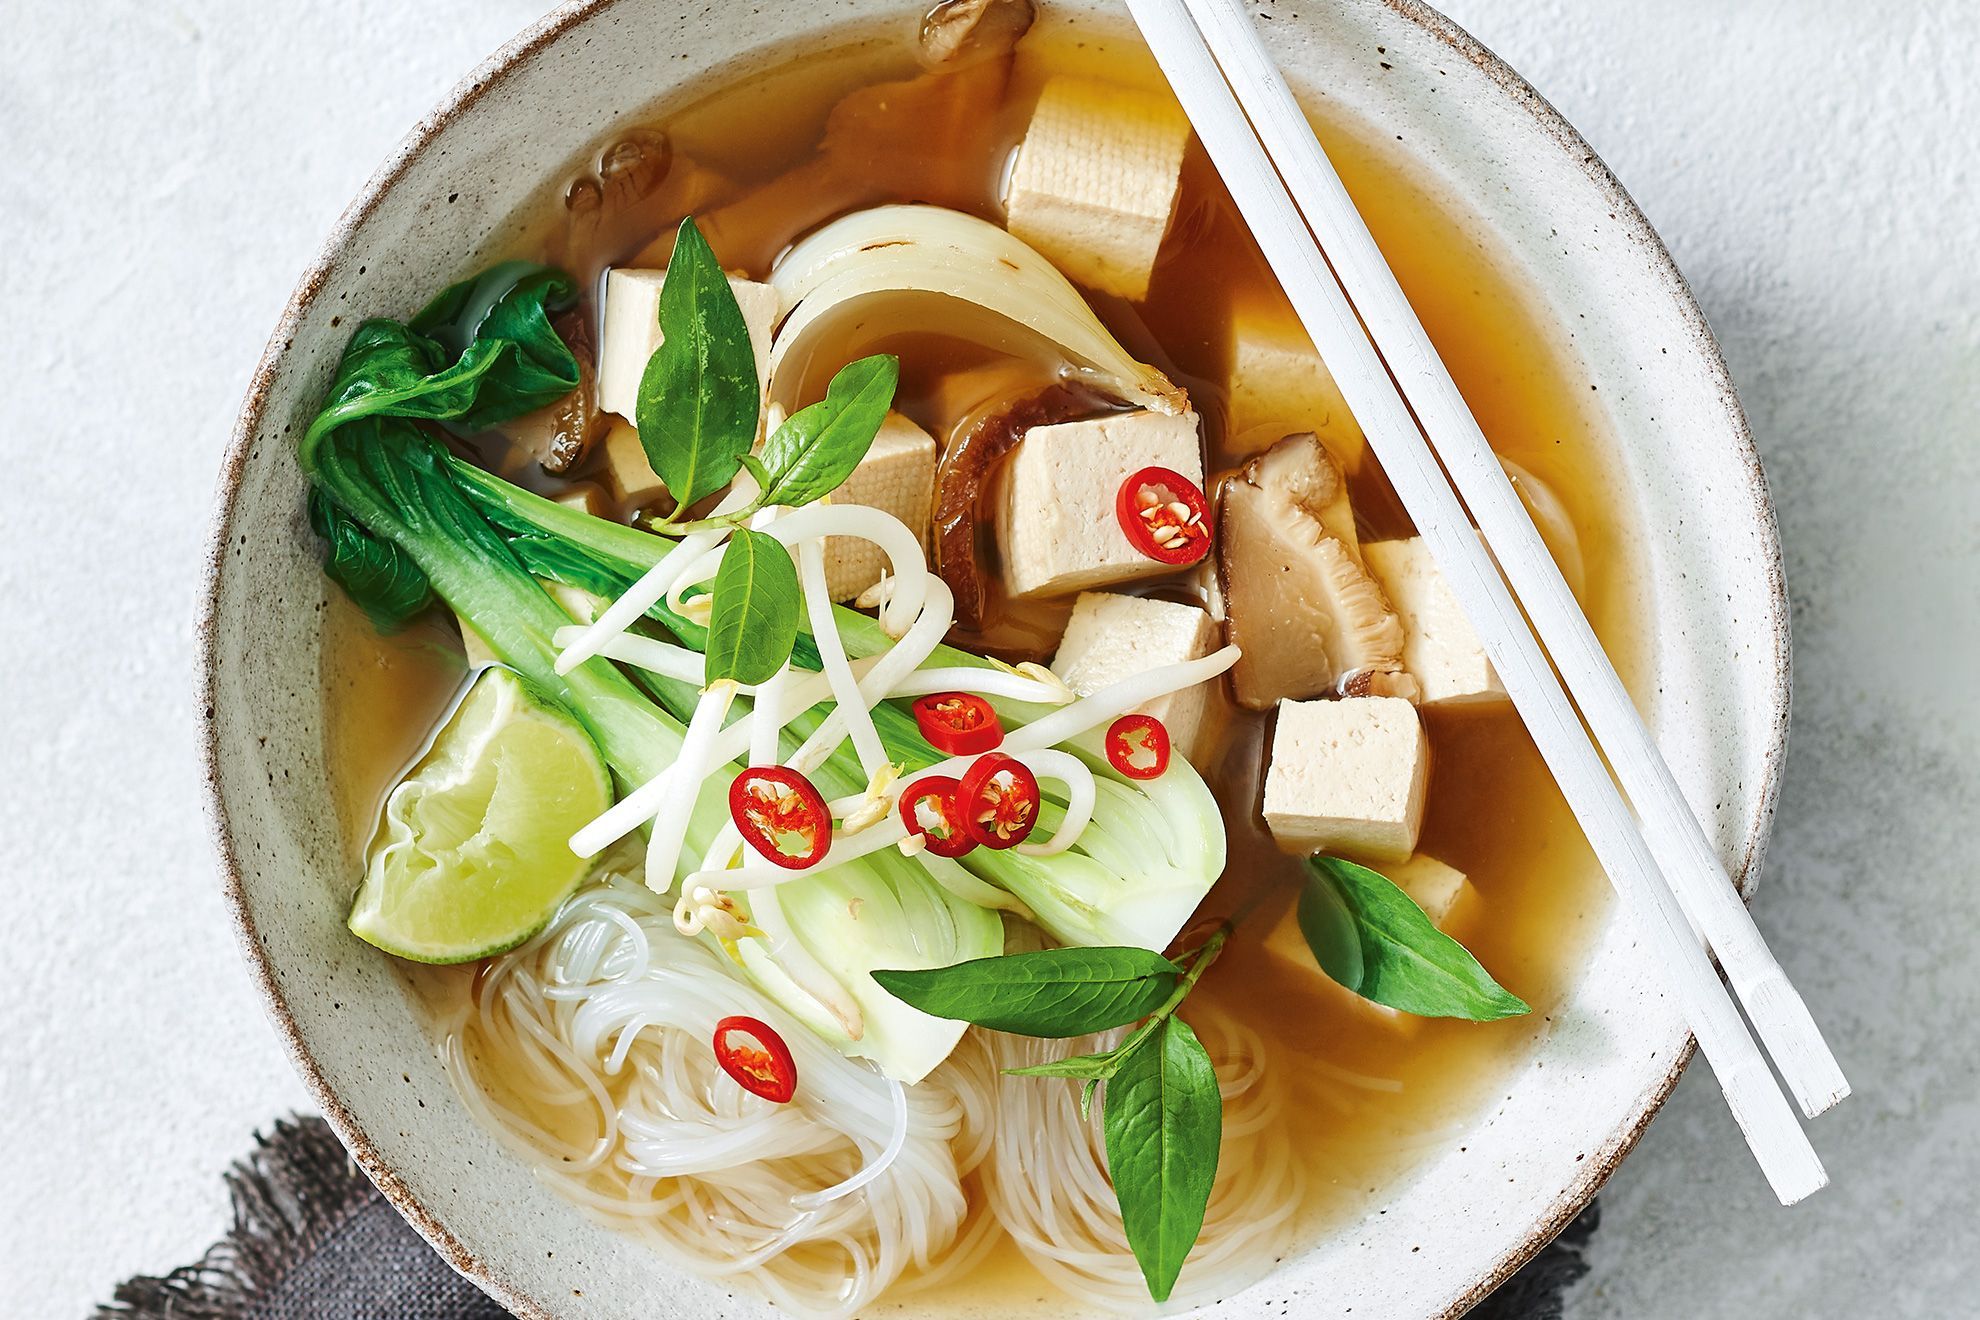 What Vegetables Are In Pho